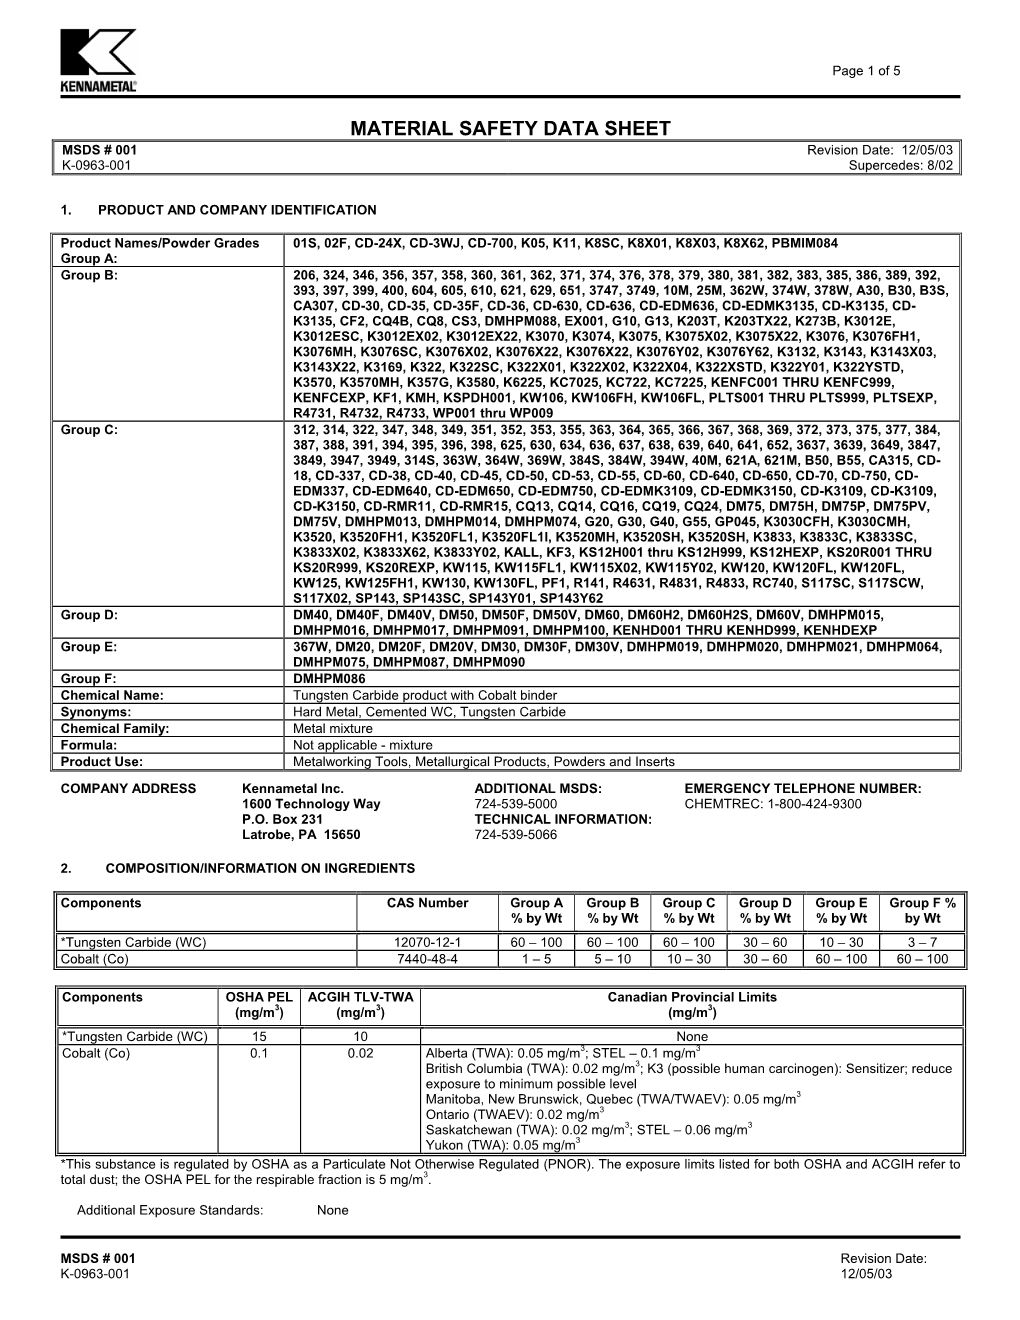 MATERIAL SAFETY DATA SHEET MSDS # 001 Revision Date: 12/05/03 K-0963-001 Supercedes: 8/02